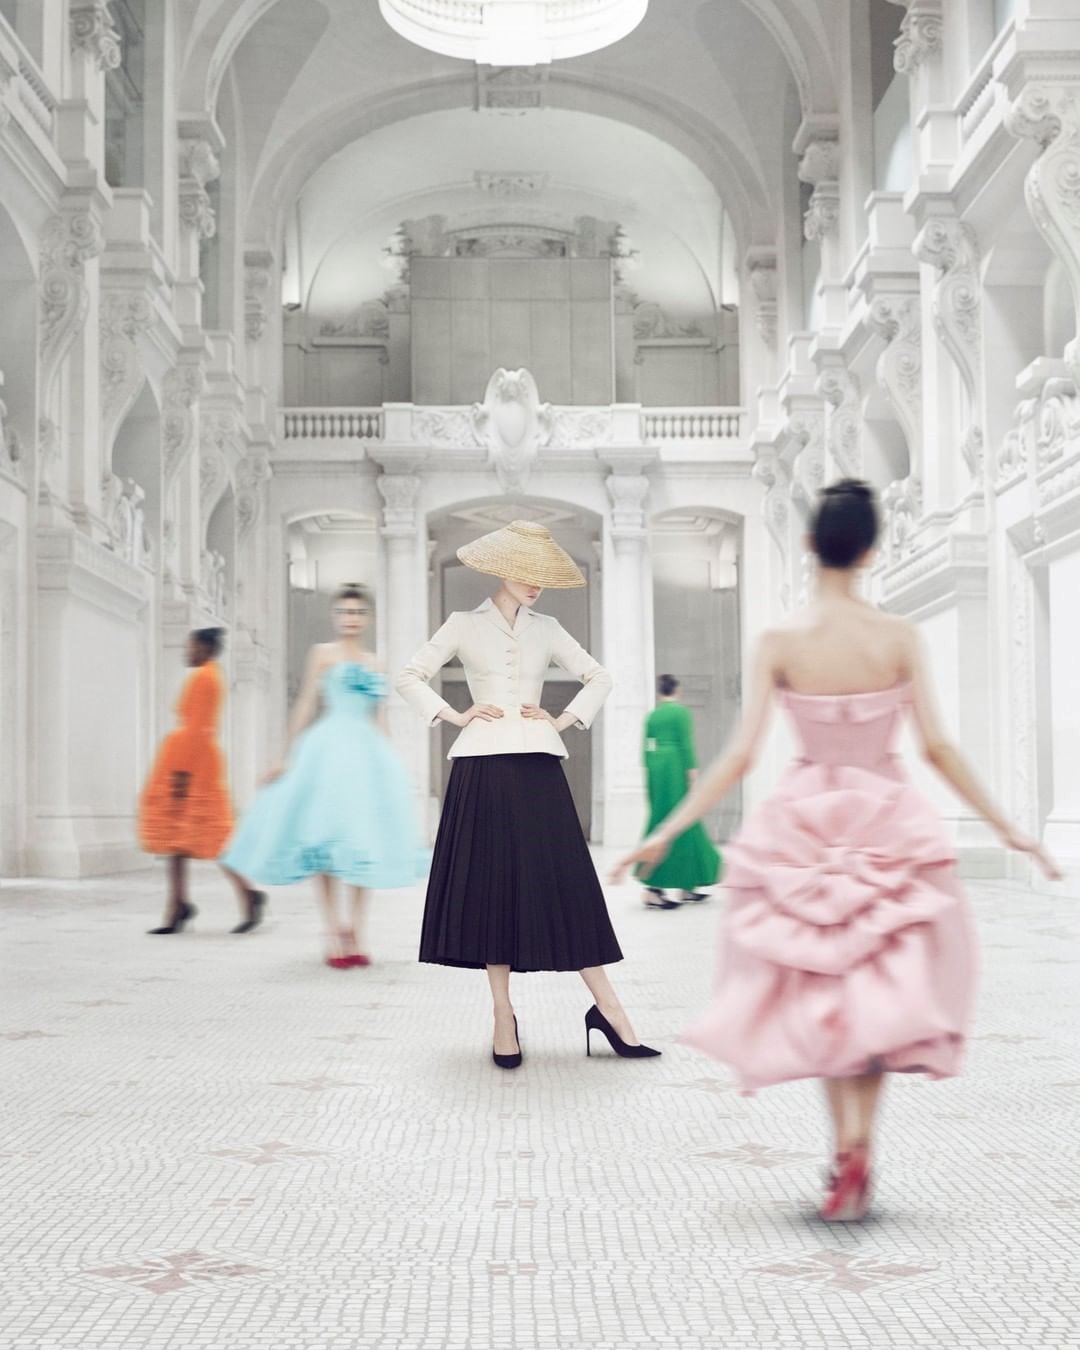 vrede Email schrijven weekend You Can Now See Dior's 'Designer of Dreams' Exhibition From Home | AnOther